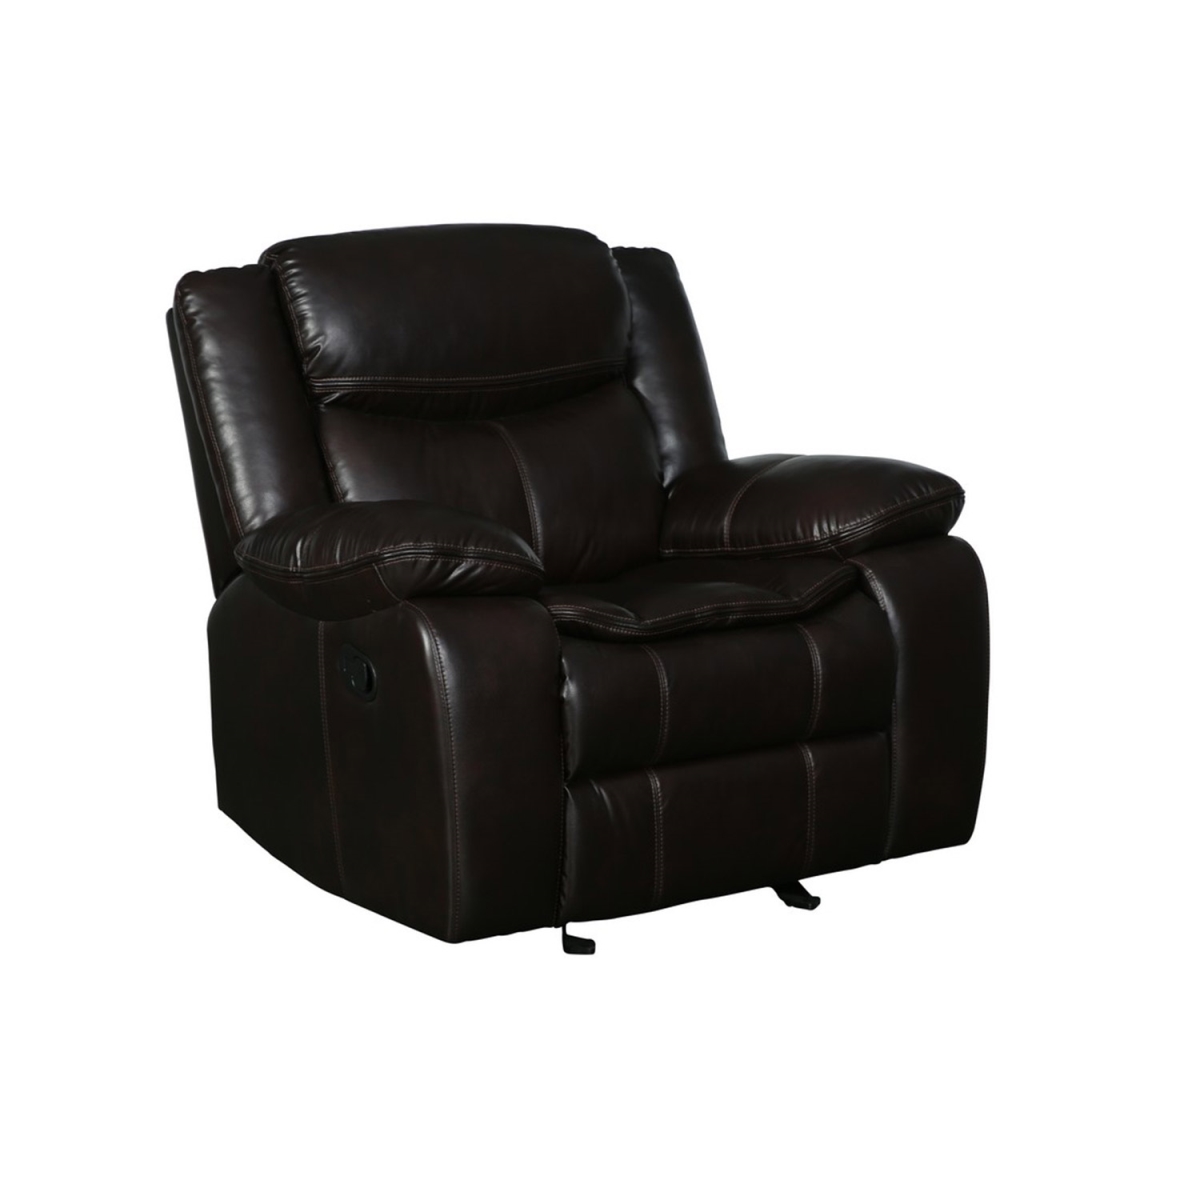 Picture of HomeRoots 366306 Leather Upholstery & Solid Wood Frame Brown Chair - 42 x 36 x 40 in.